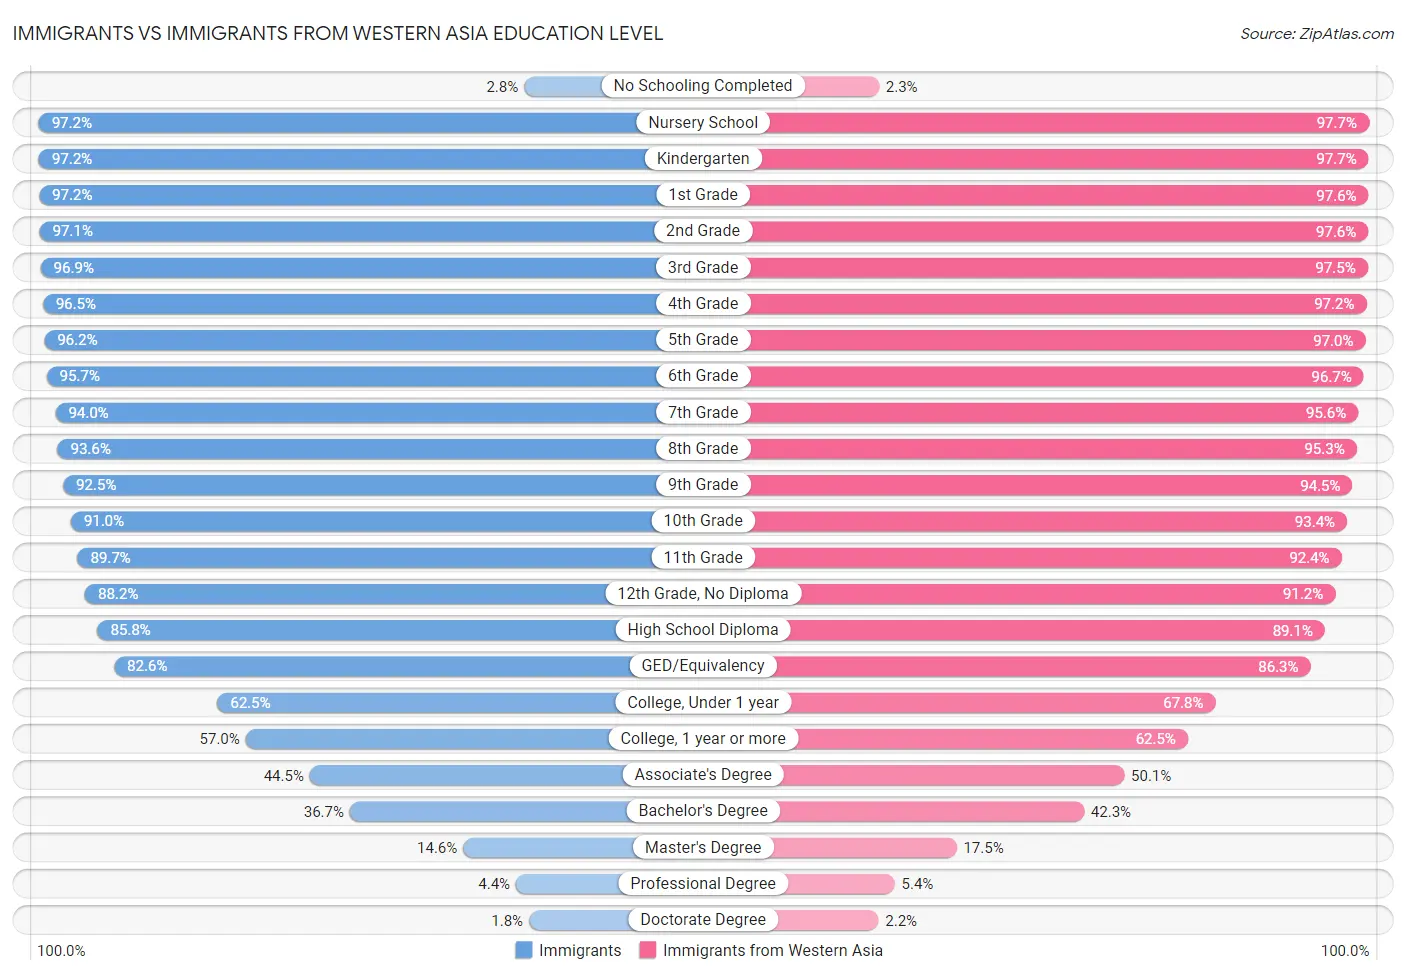 Immigrants vs Immigrants from Western Asia Education Level